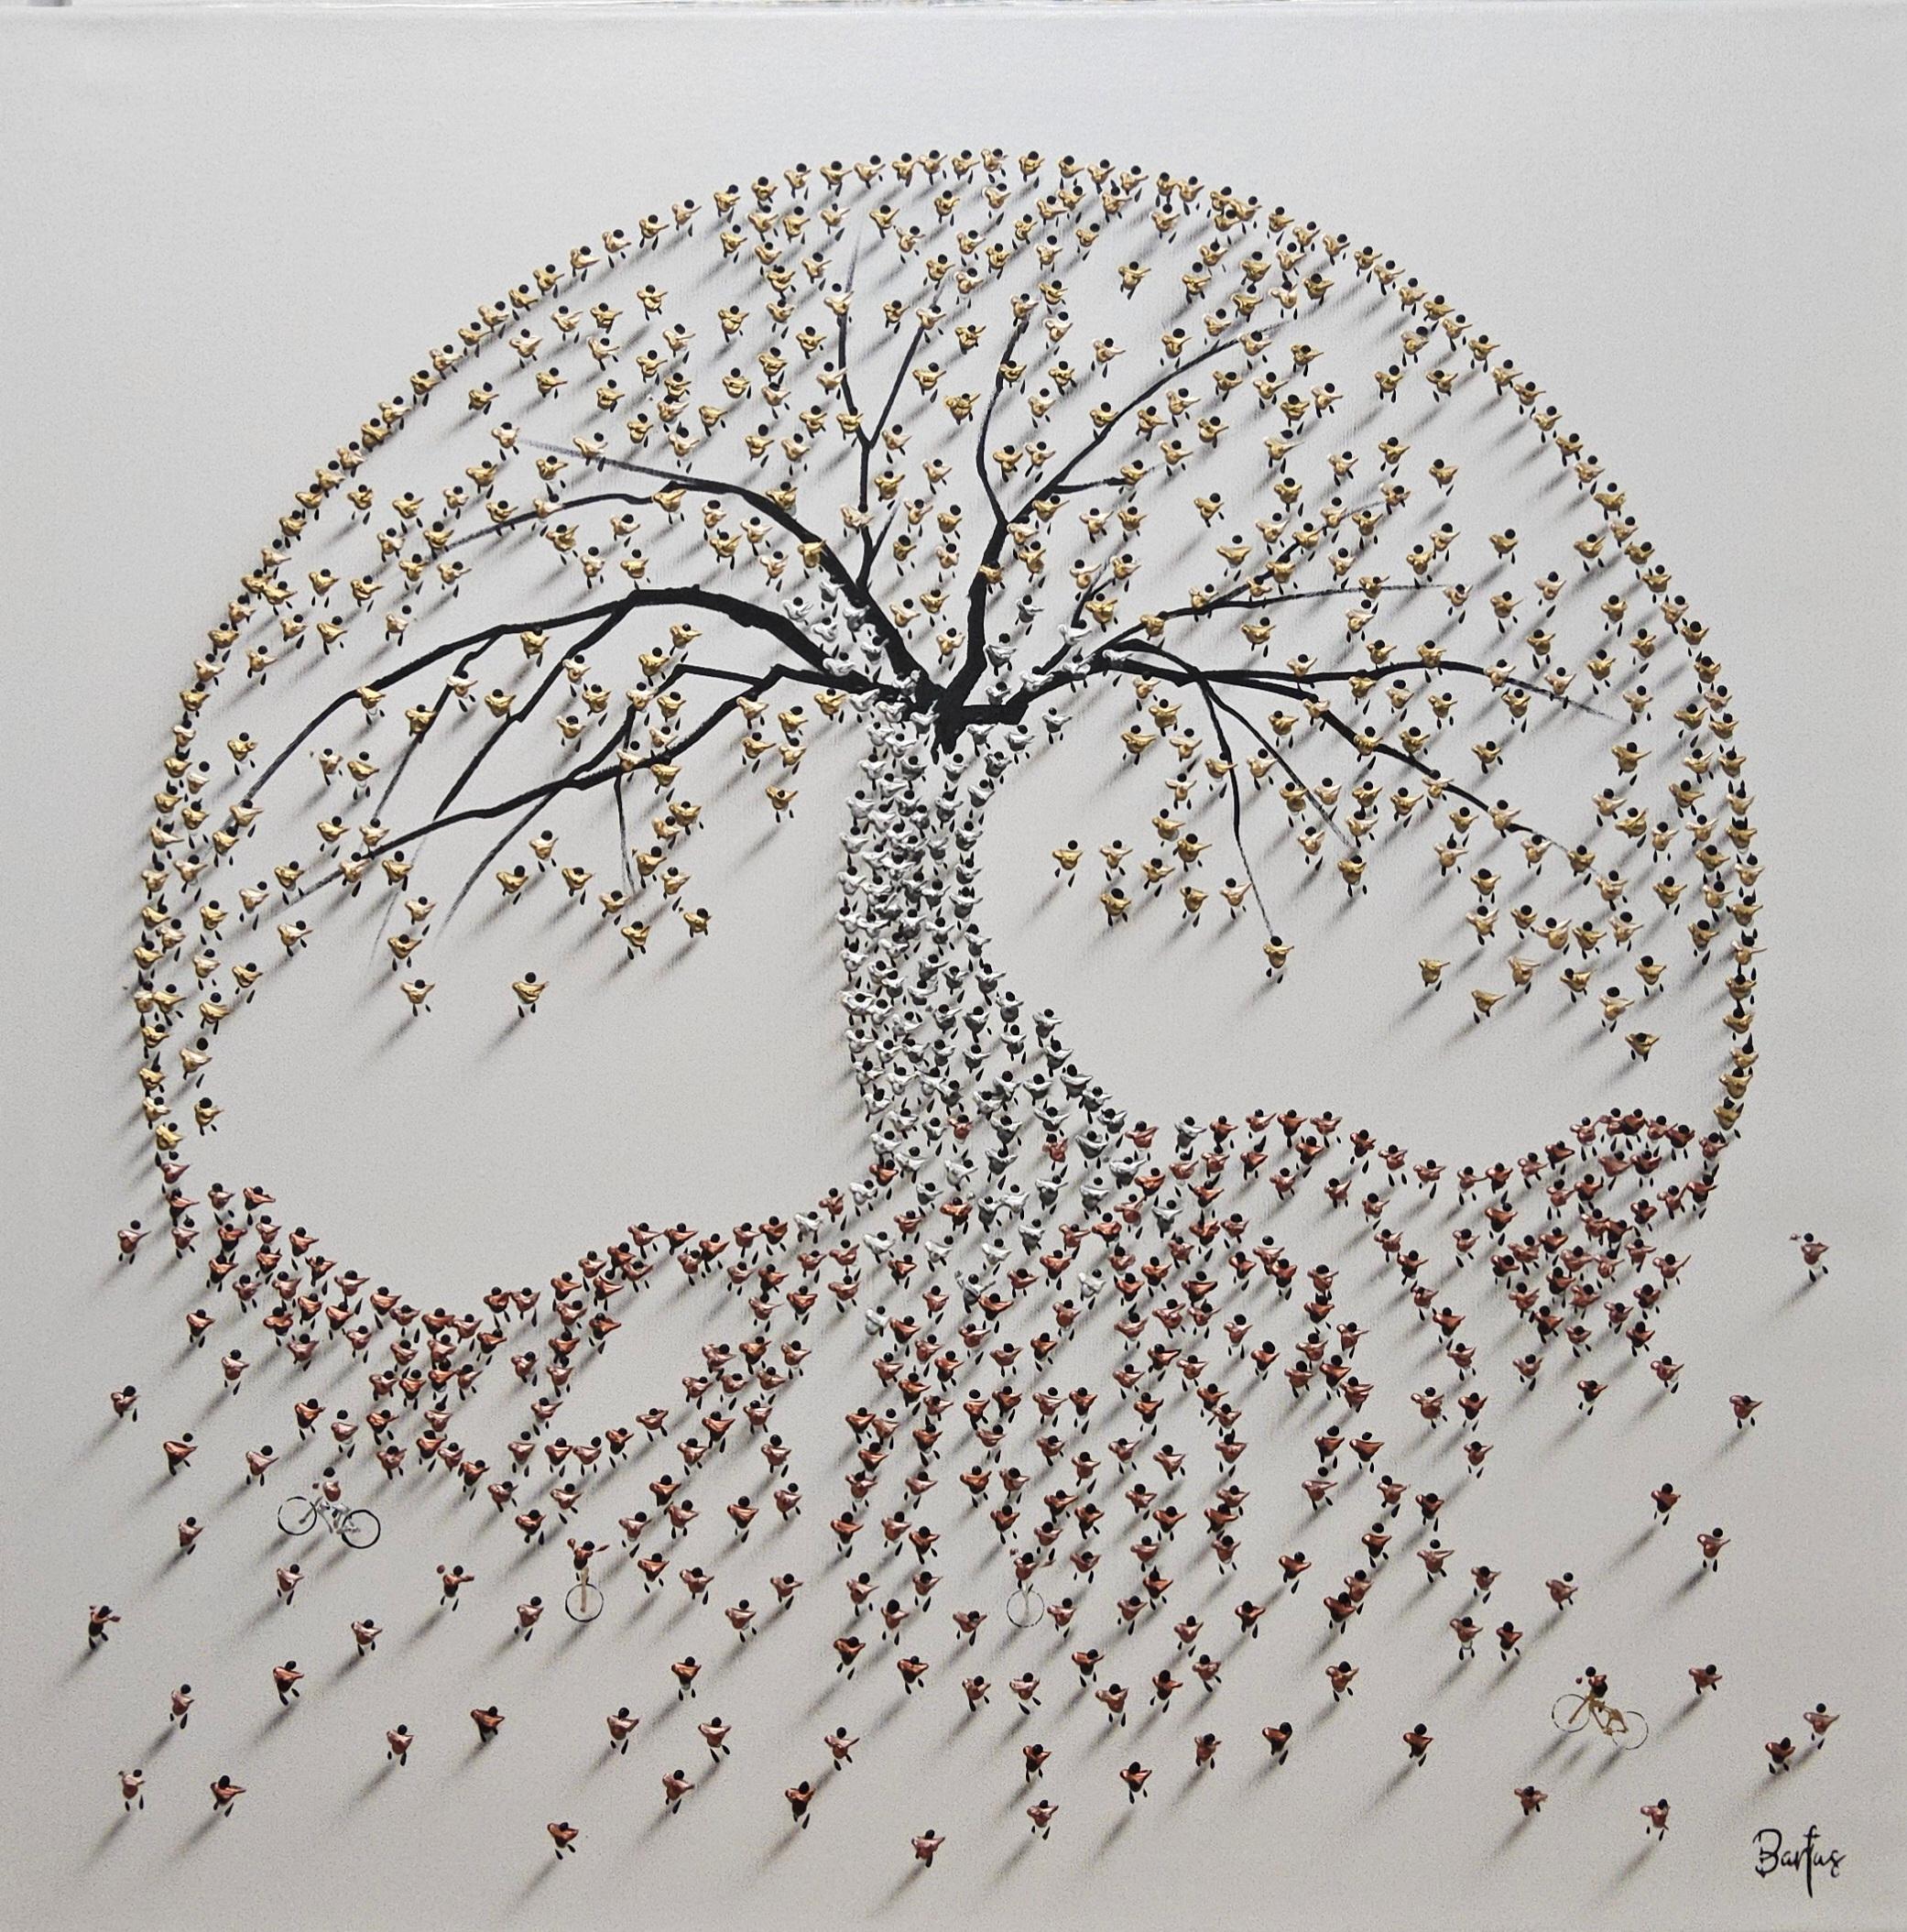 This piece, "Tree of Life", is a 40x40 mixed media painting on canvas by artist Francisco Bartus. Featured is a tree of life symbol, made up of individual helpings of paint, strategically placed and formed to create the impression of tiny metallic